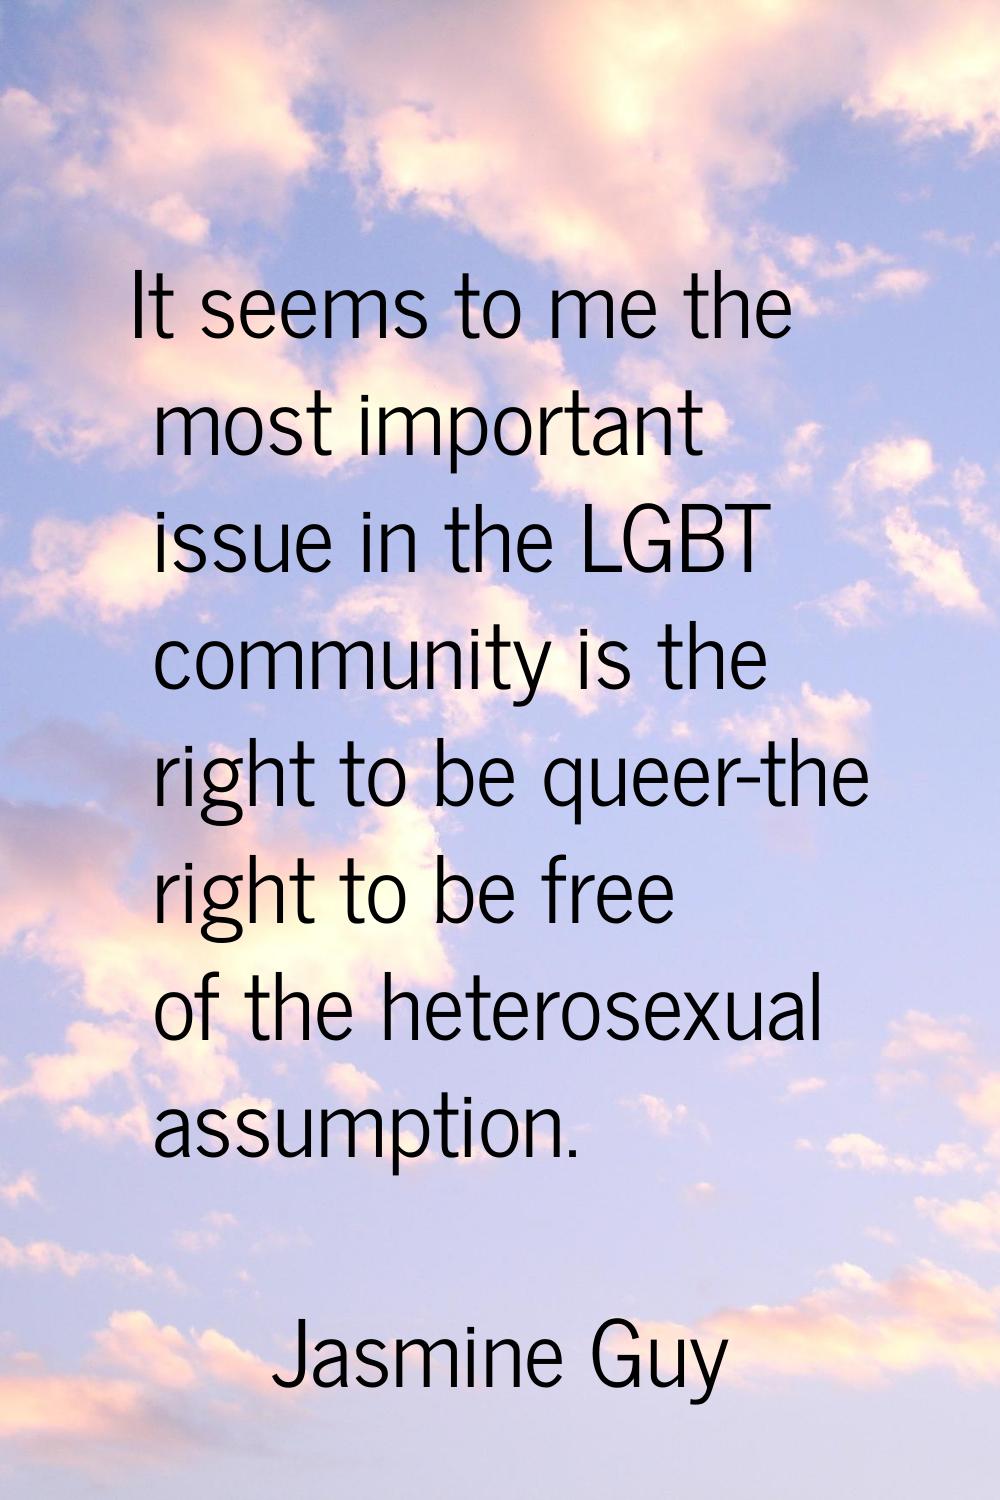 It seems to me the most important issue in the LGBT community is the right to be queer-the right to